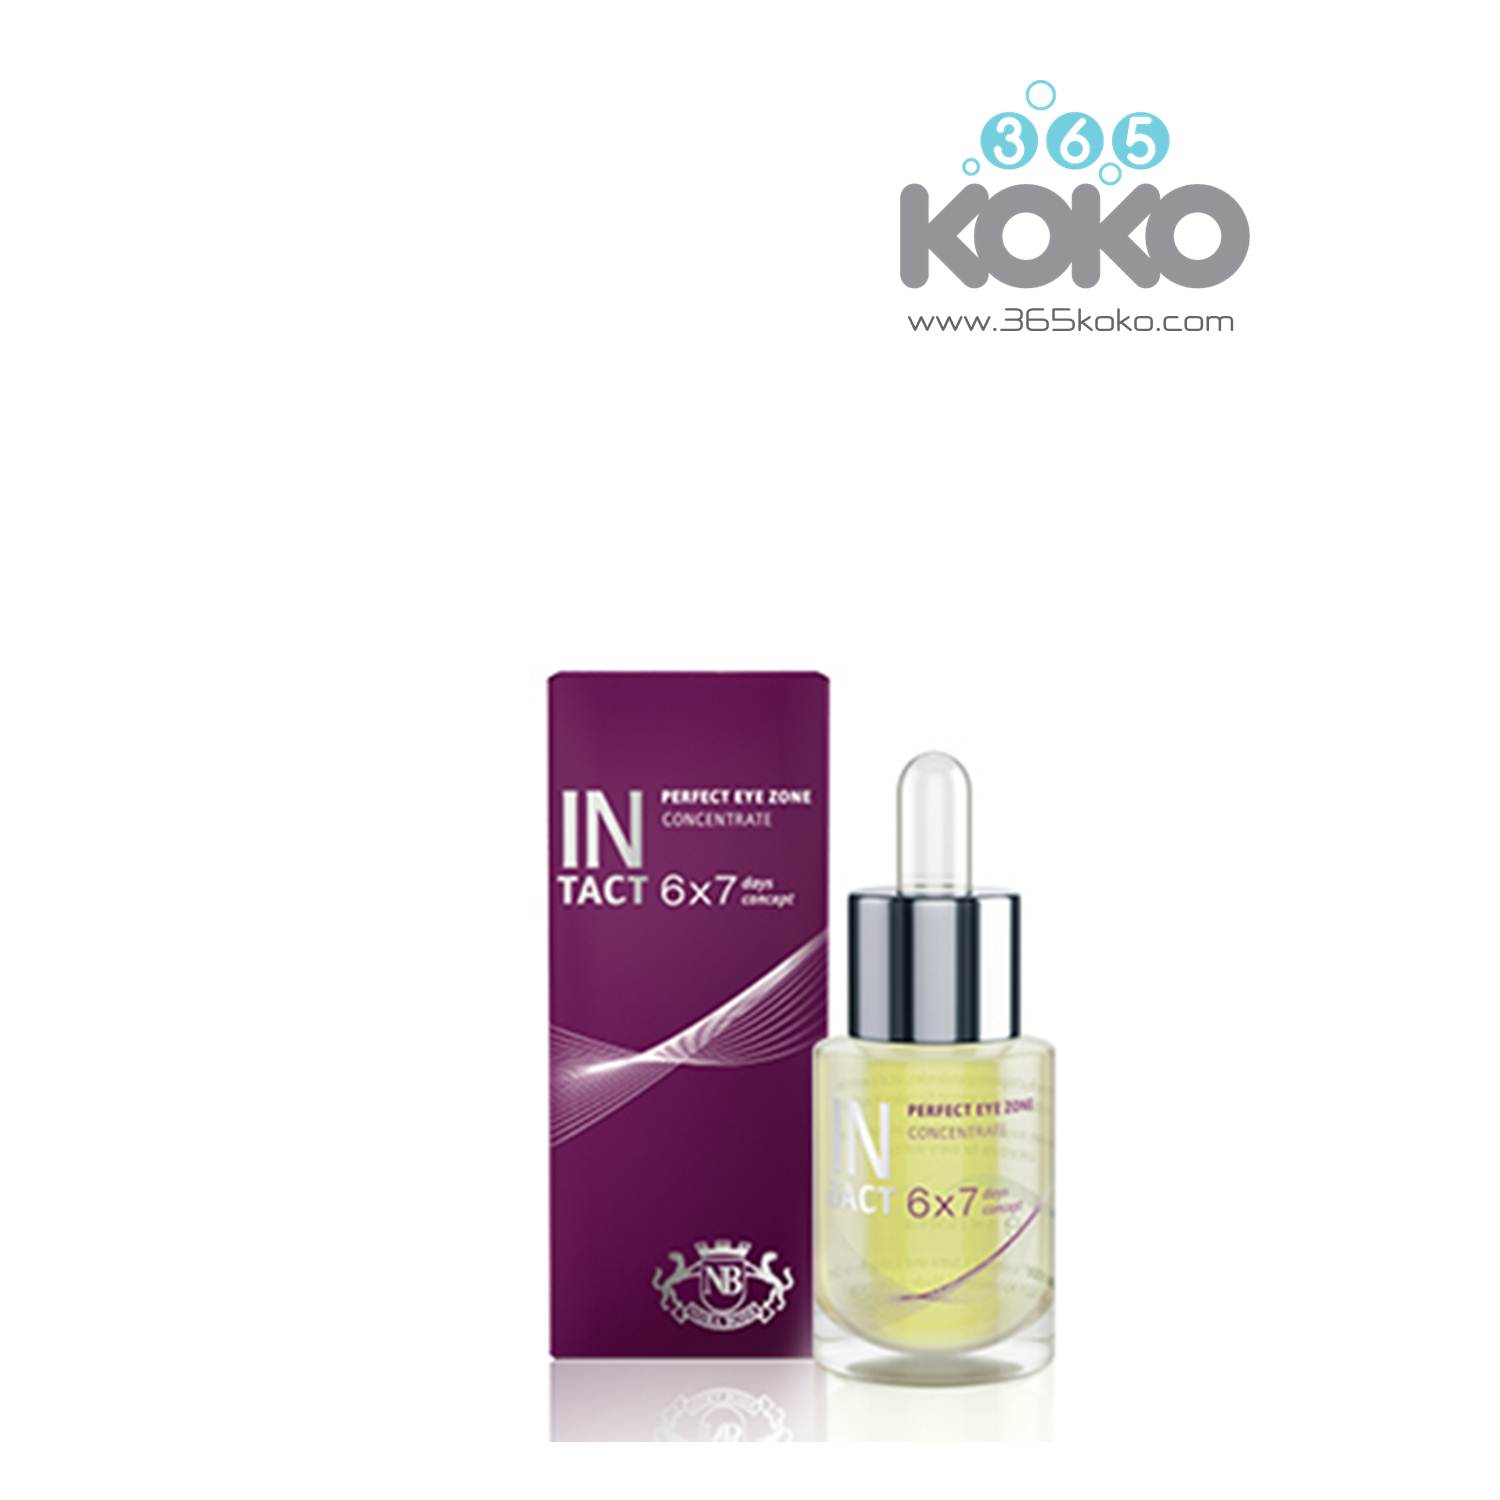 intact Perfect Eye Zone Concentrate